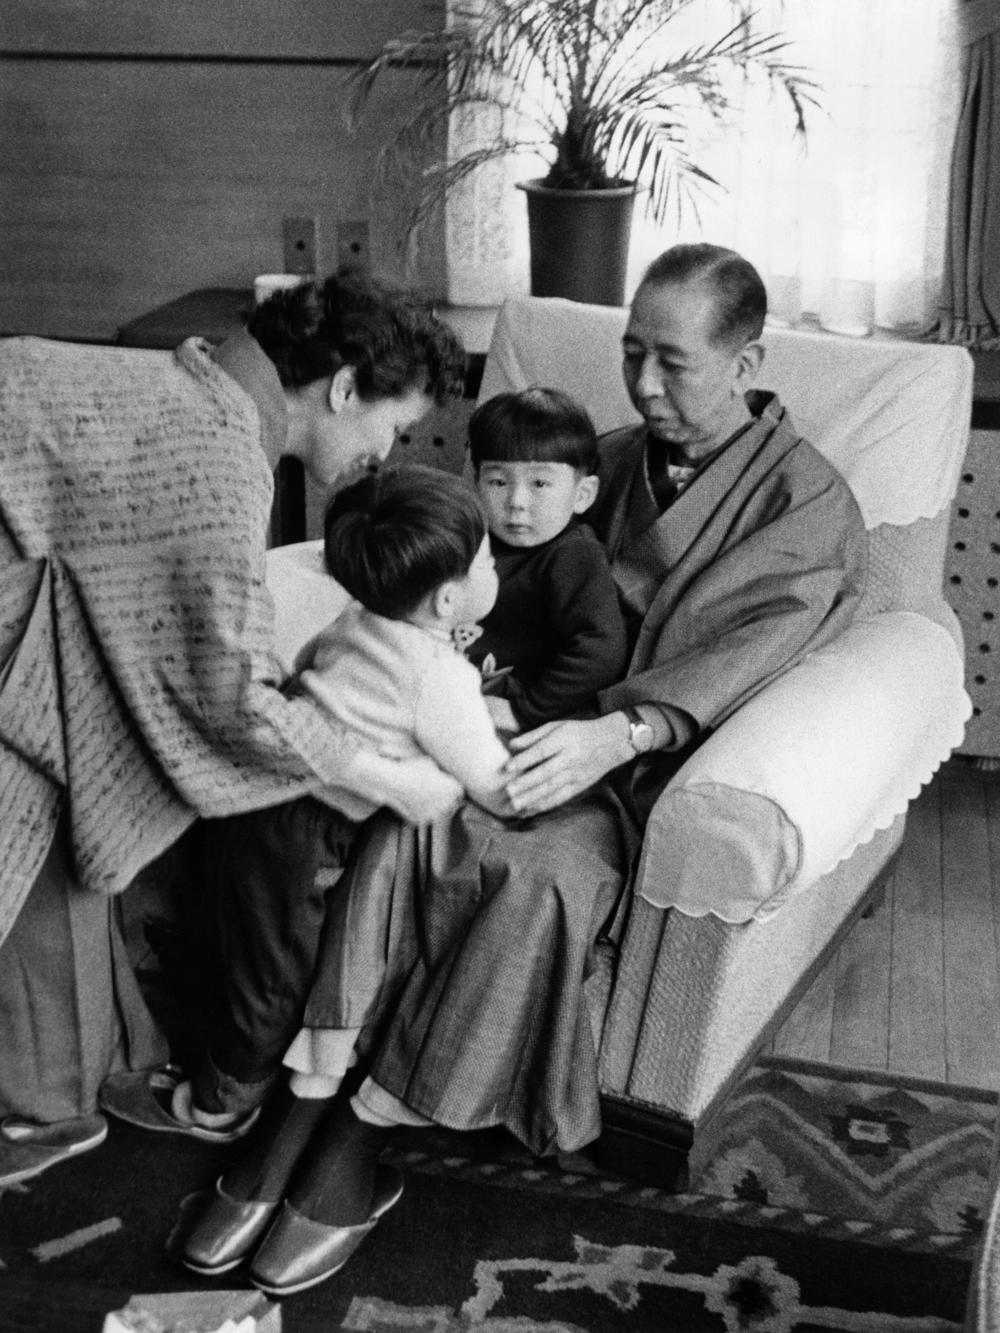 A family picture of Nobusuke Kishi, then-prime minister of Japan, and his wife Ryoko in a kimono, with their grandsons Shinzo Abe and Hironobu Abe (on his grandfather's lap). The photo is undated but is probably taken in the 1960s, likely in the prime minister's official residence in Tokyo.